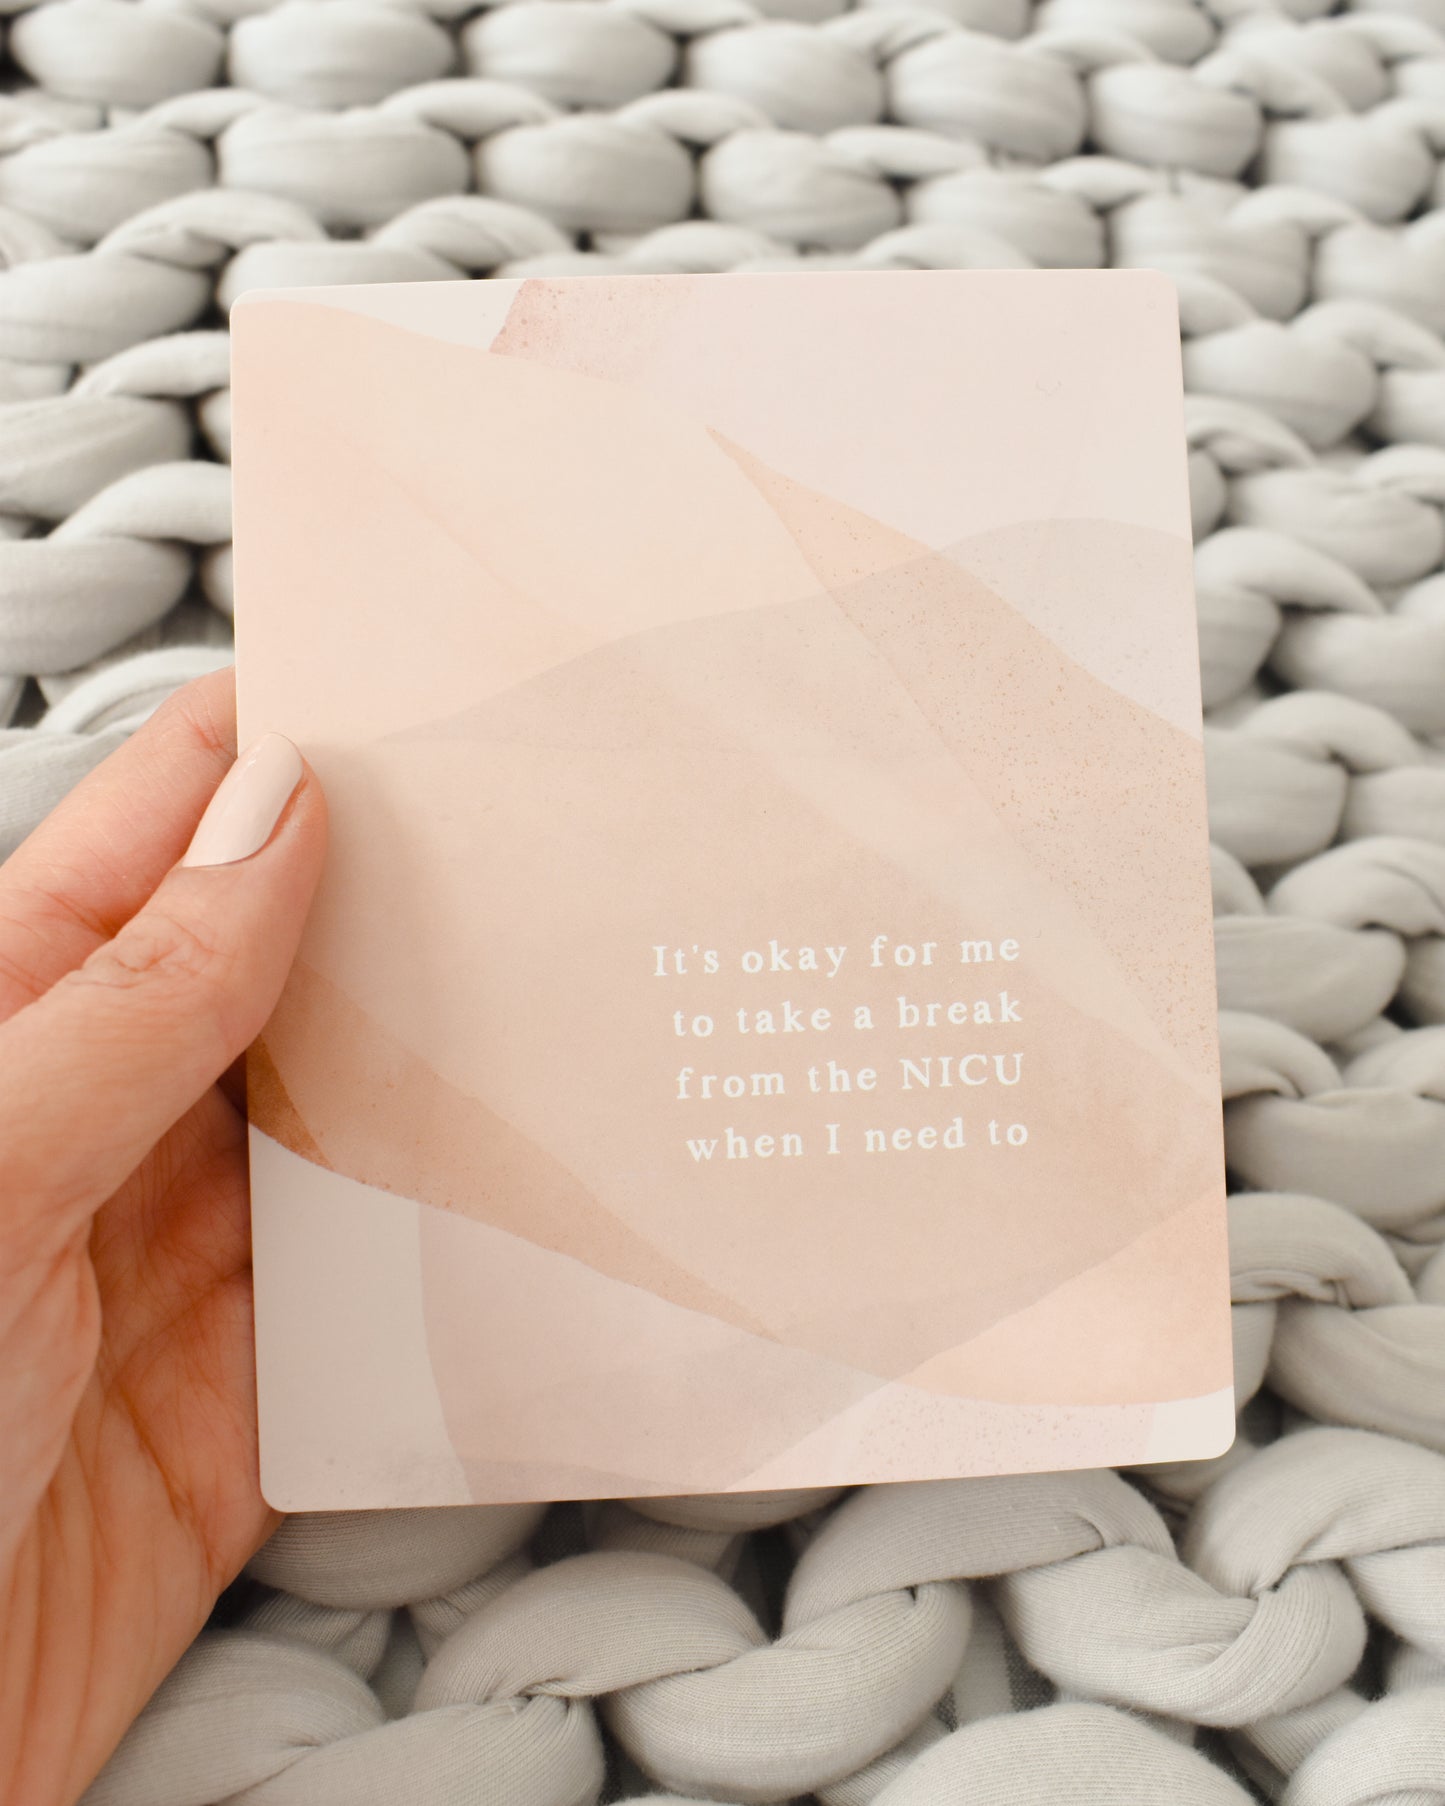 NICU Mama Affirmation Card from Fourth Trimester Mama, reads "It's okay for me to take a break from the NICU when I need to"